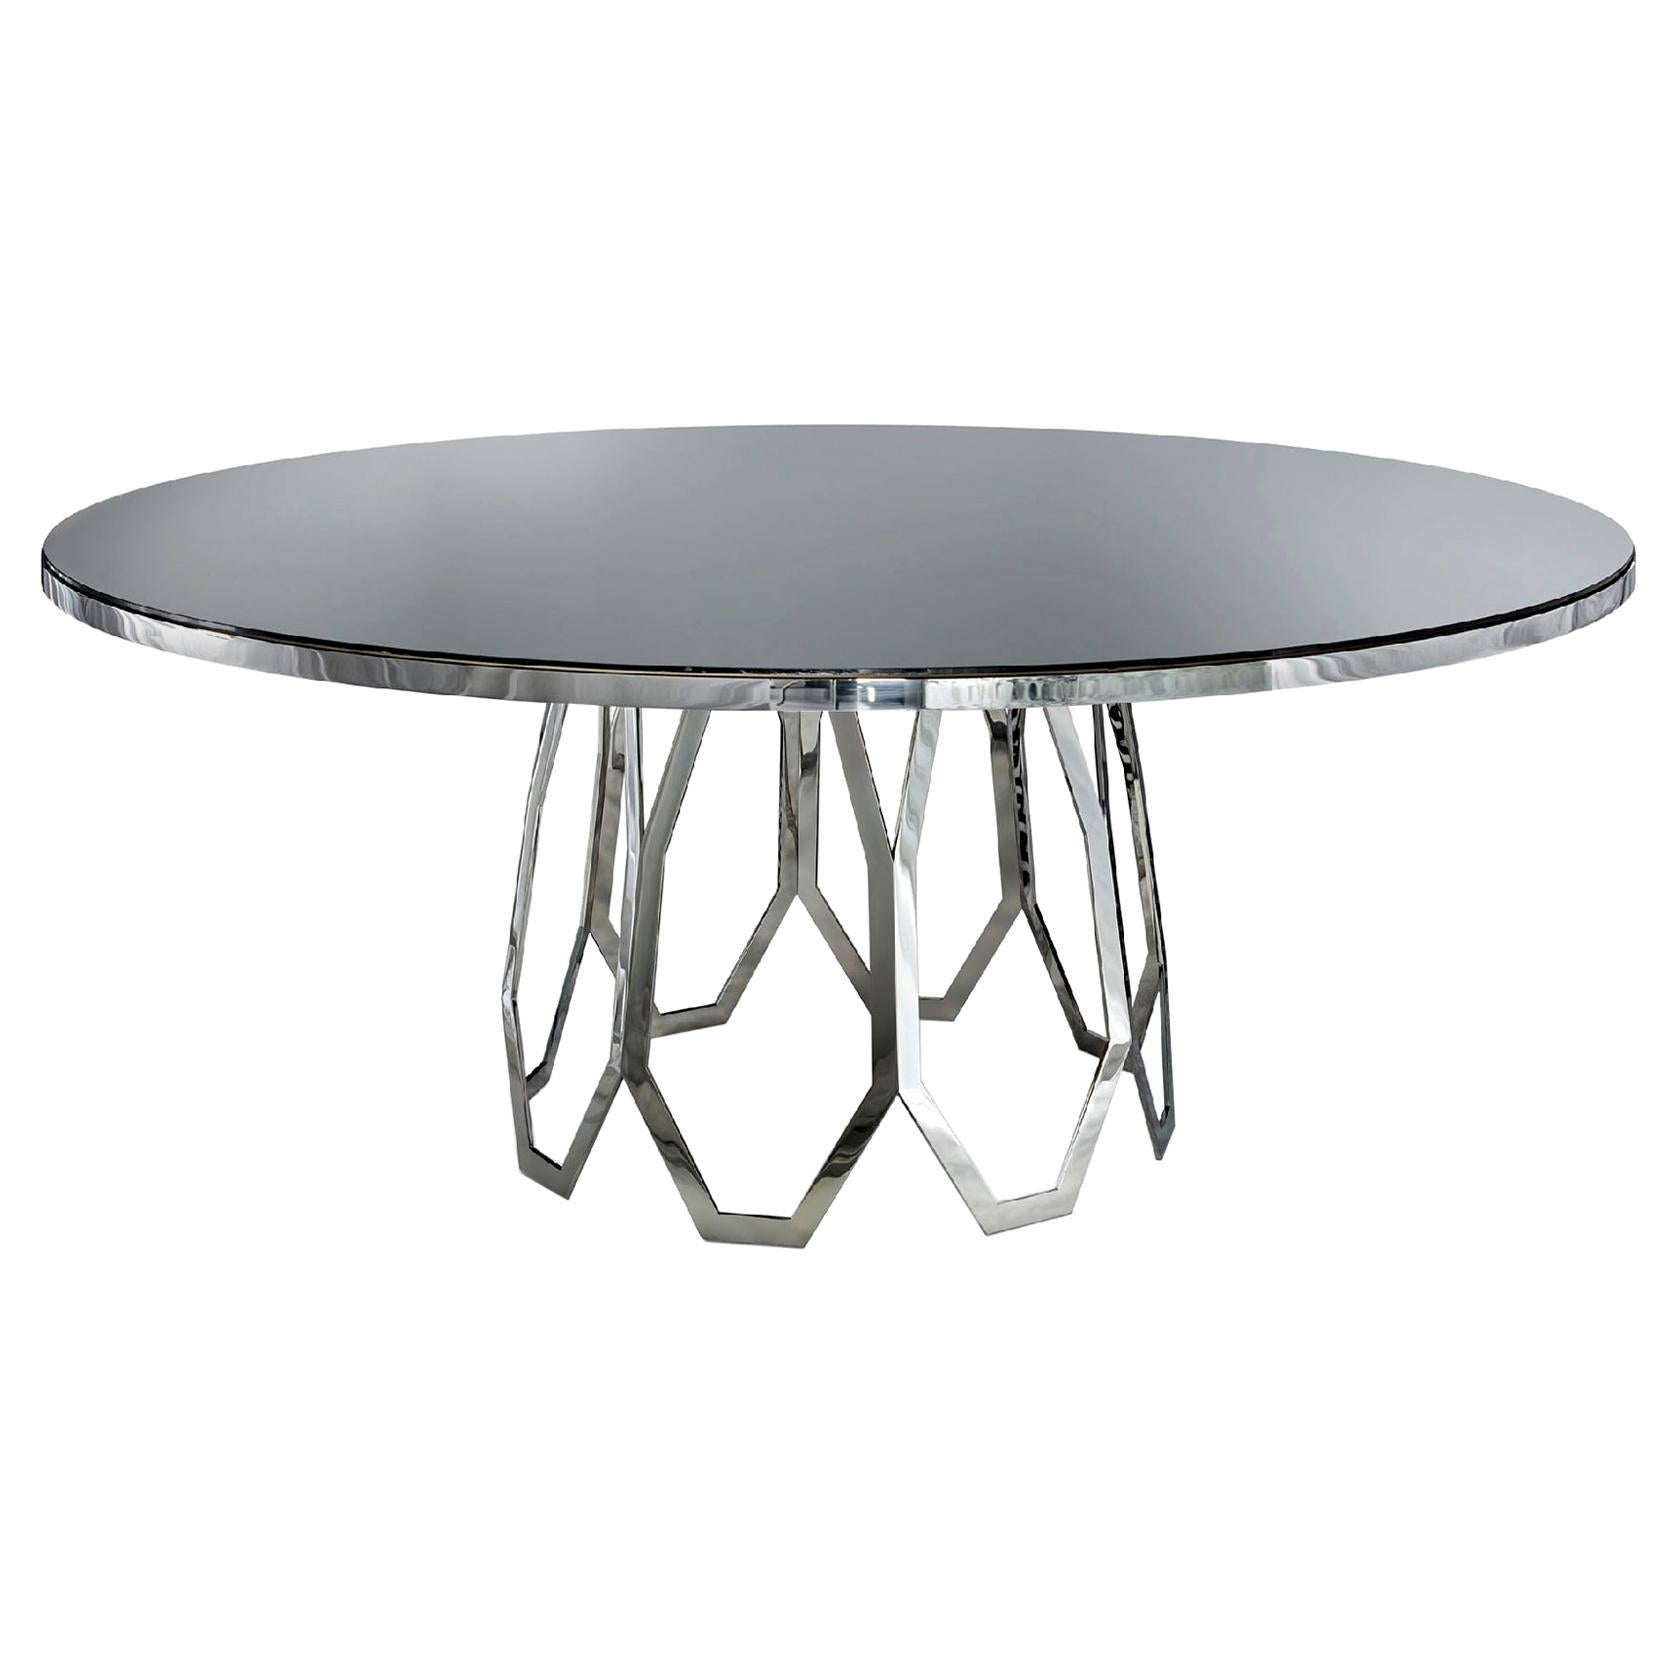 Table Frame Polished Stainless Steel Top Available Mirror Marble & Liquid Metal For Sale